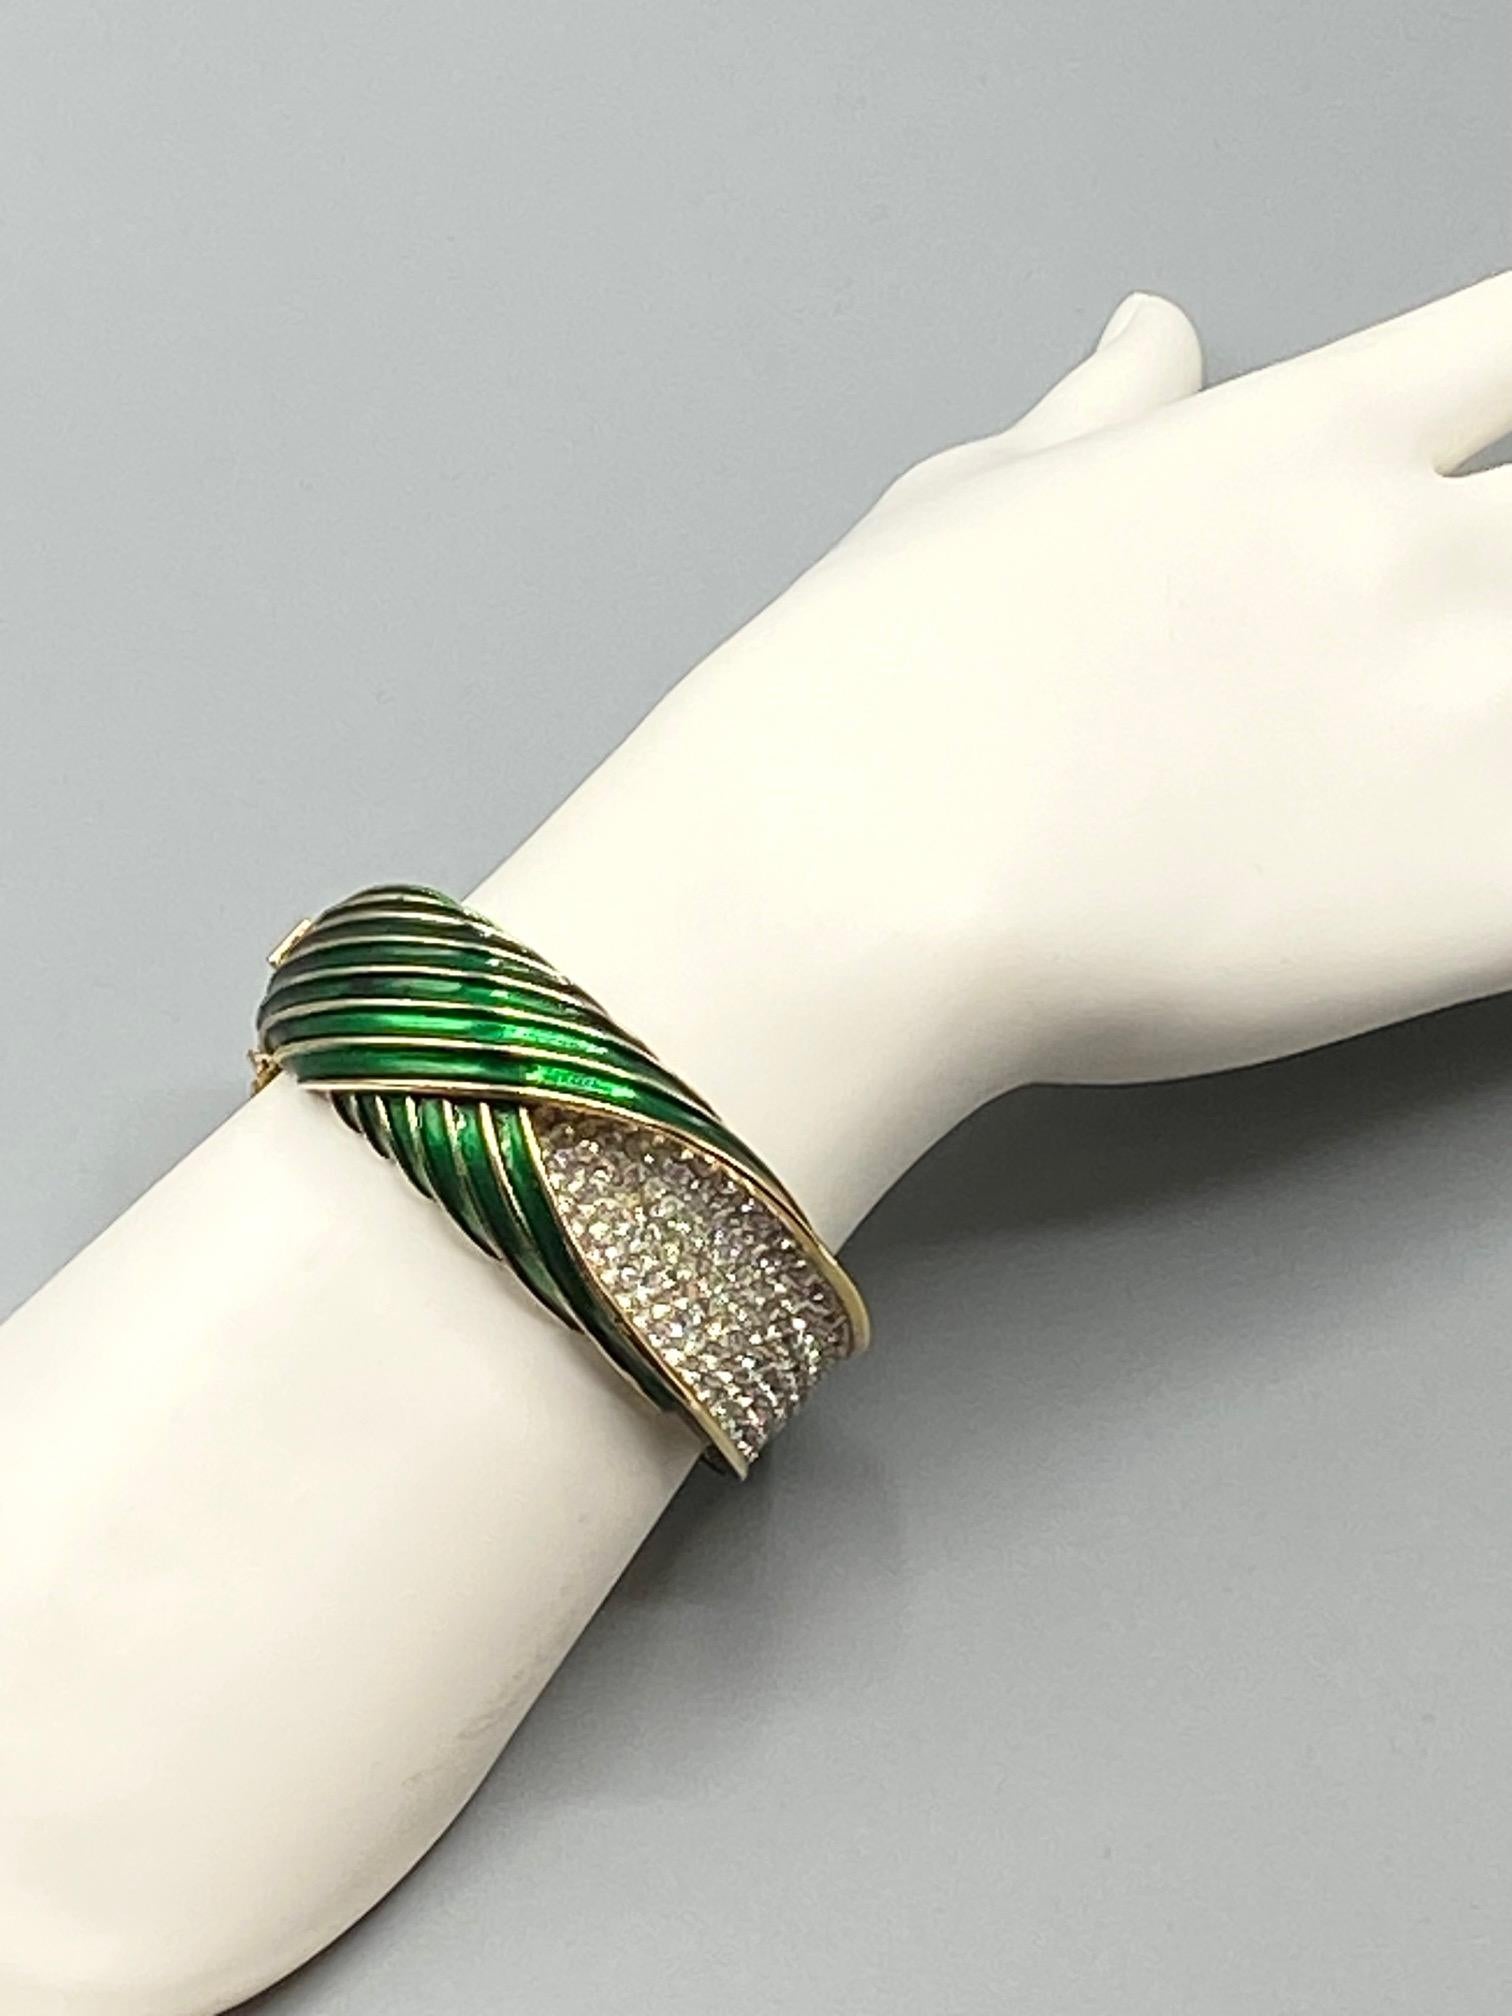 A very uniquely designed bangle style bracelet by Trifari from the 1960s. It is domed with swirling concave stripes cast into the upper and lower metal parts. The stripes are green enamel with the top edges left in gold as accent and contrast to the